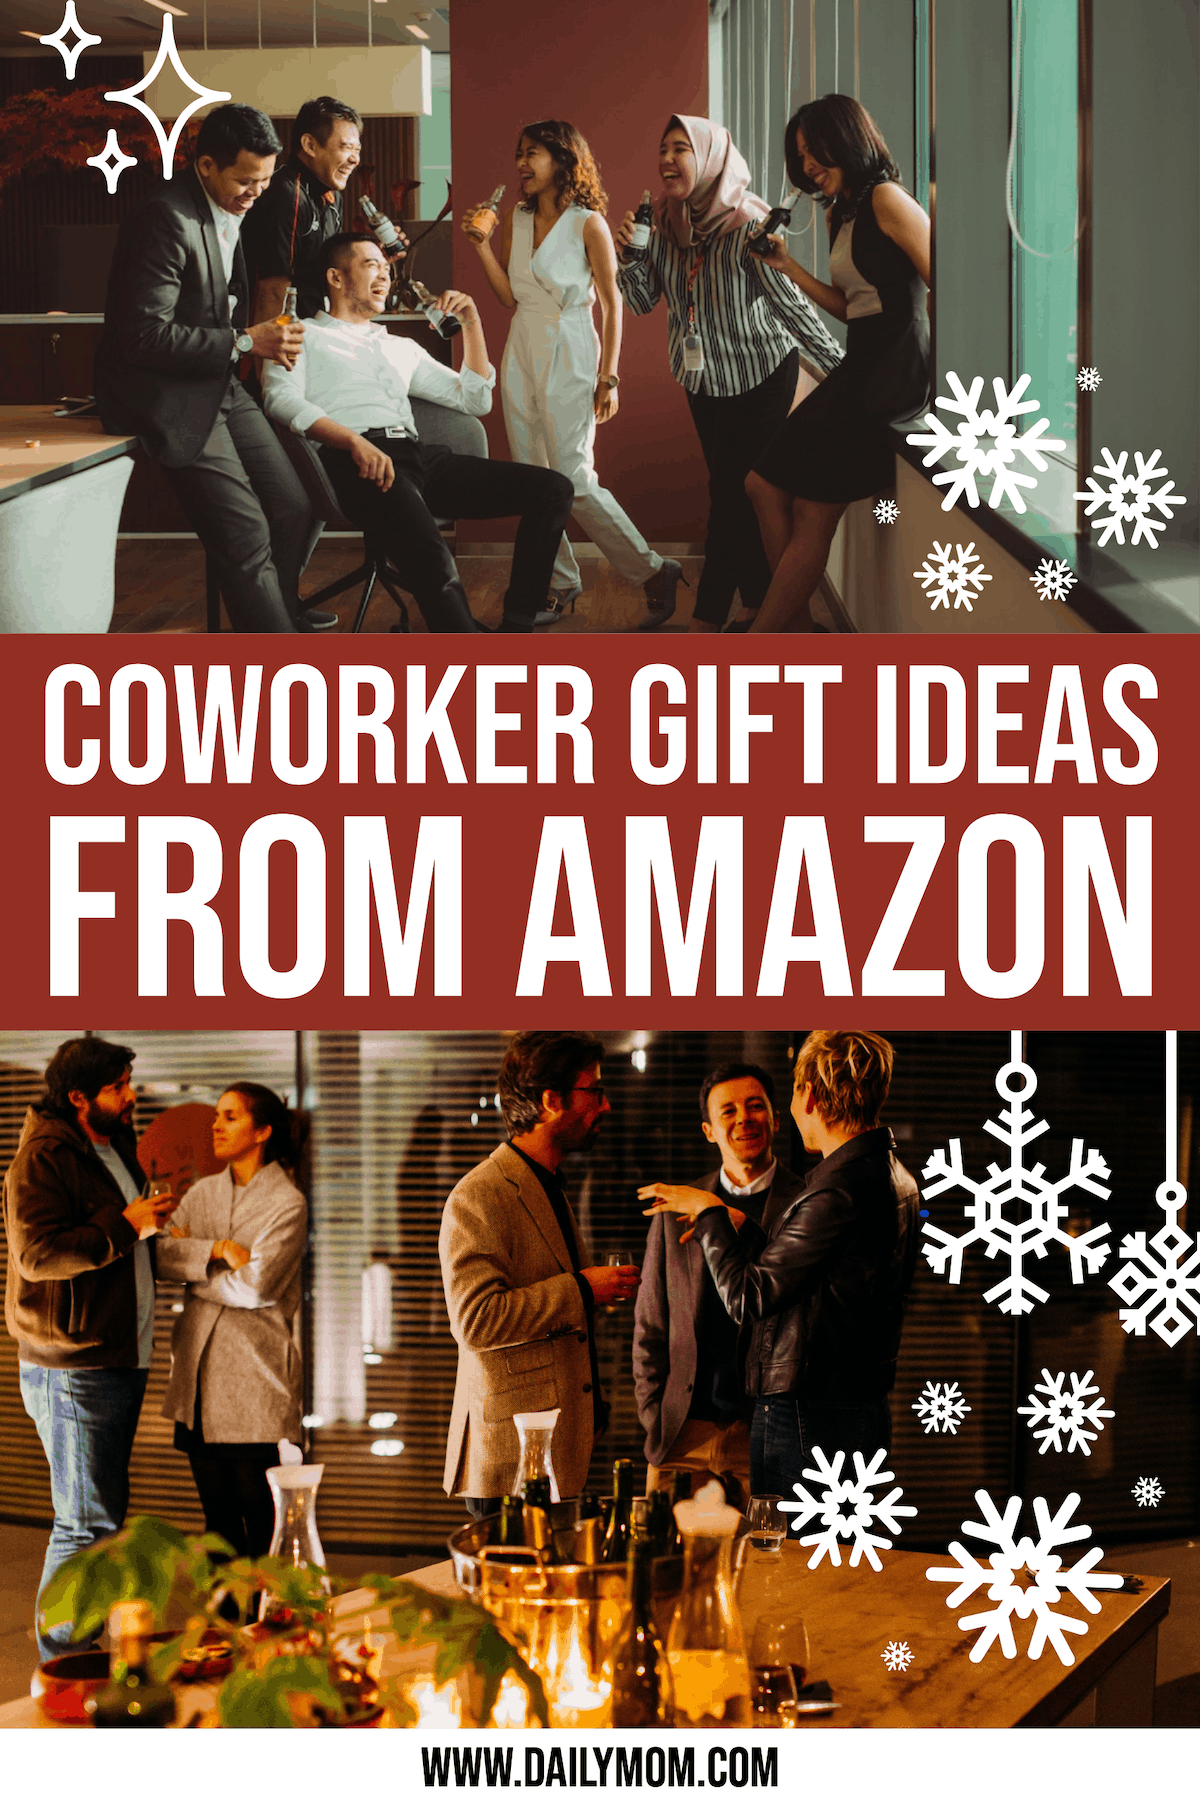 12 Coworker Gift Ideas For Christmas From Amazon  {2019}